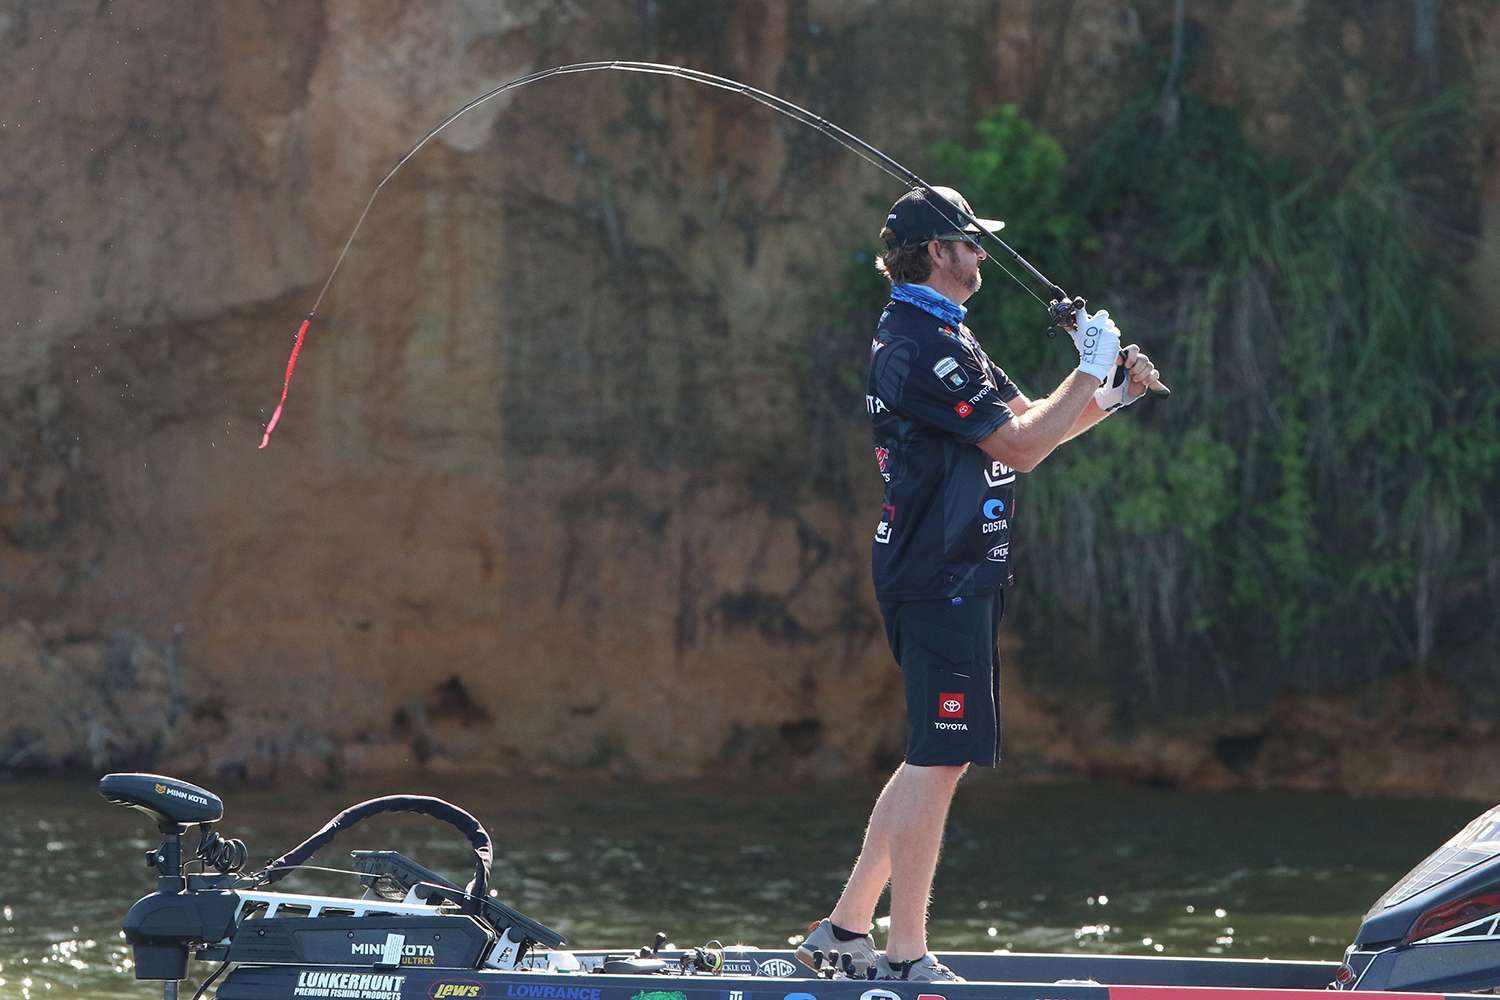 Watch Matt Arey and Kyle Welcher control BASSTrakk for a better part of the day during the second round of the 2020 DEWALT Bassmaster Elite at Lake Eufaula.